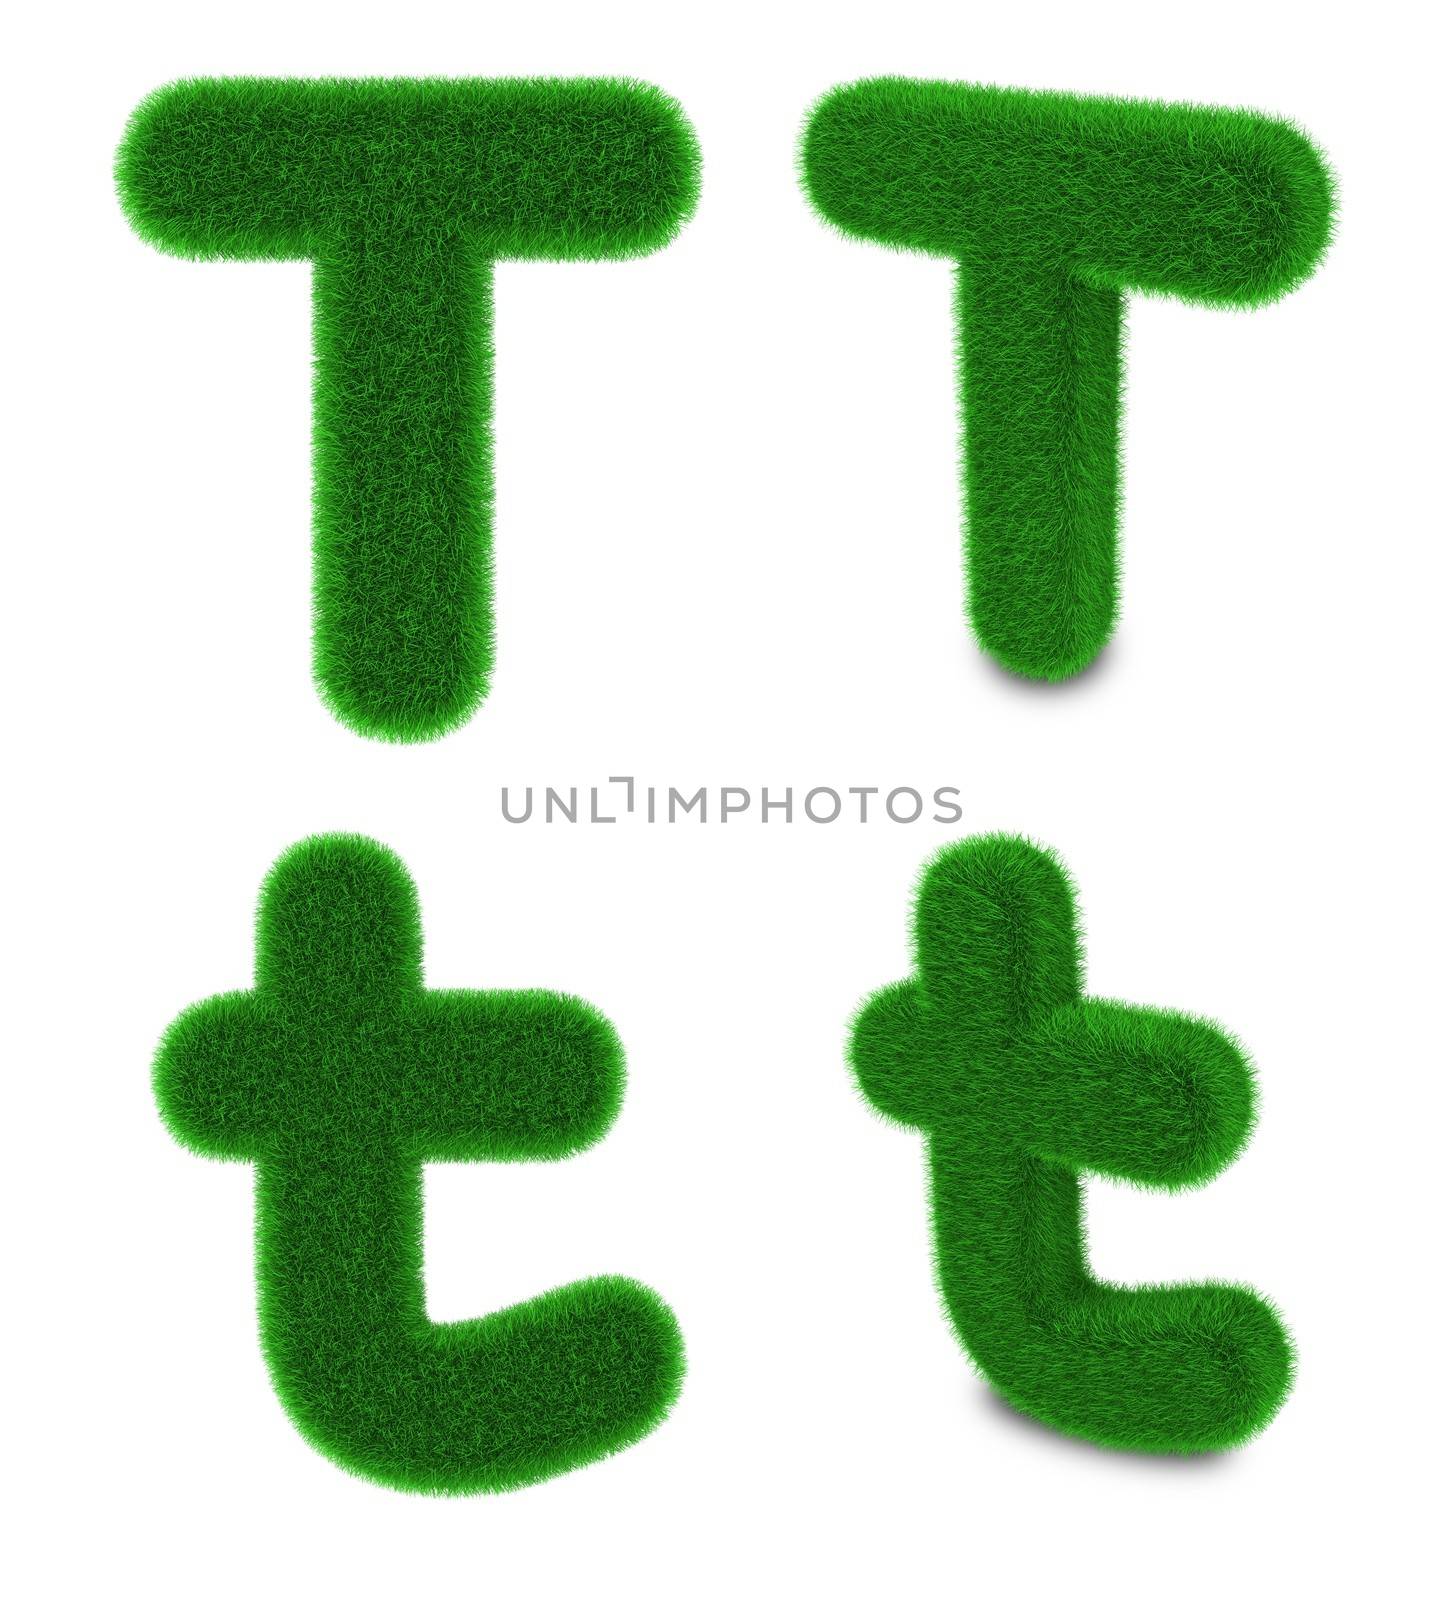 Letter T covered by green grass isolated on white background